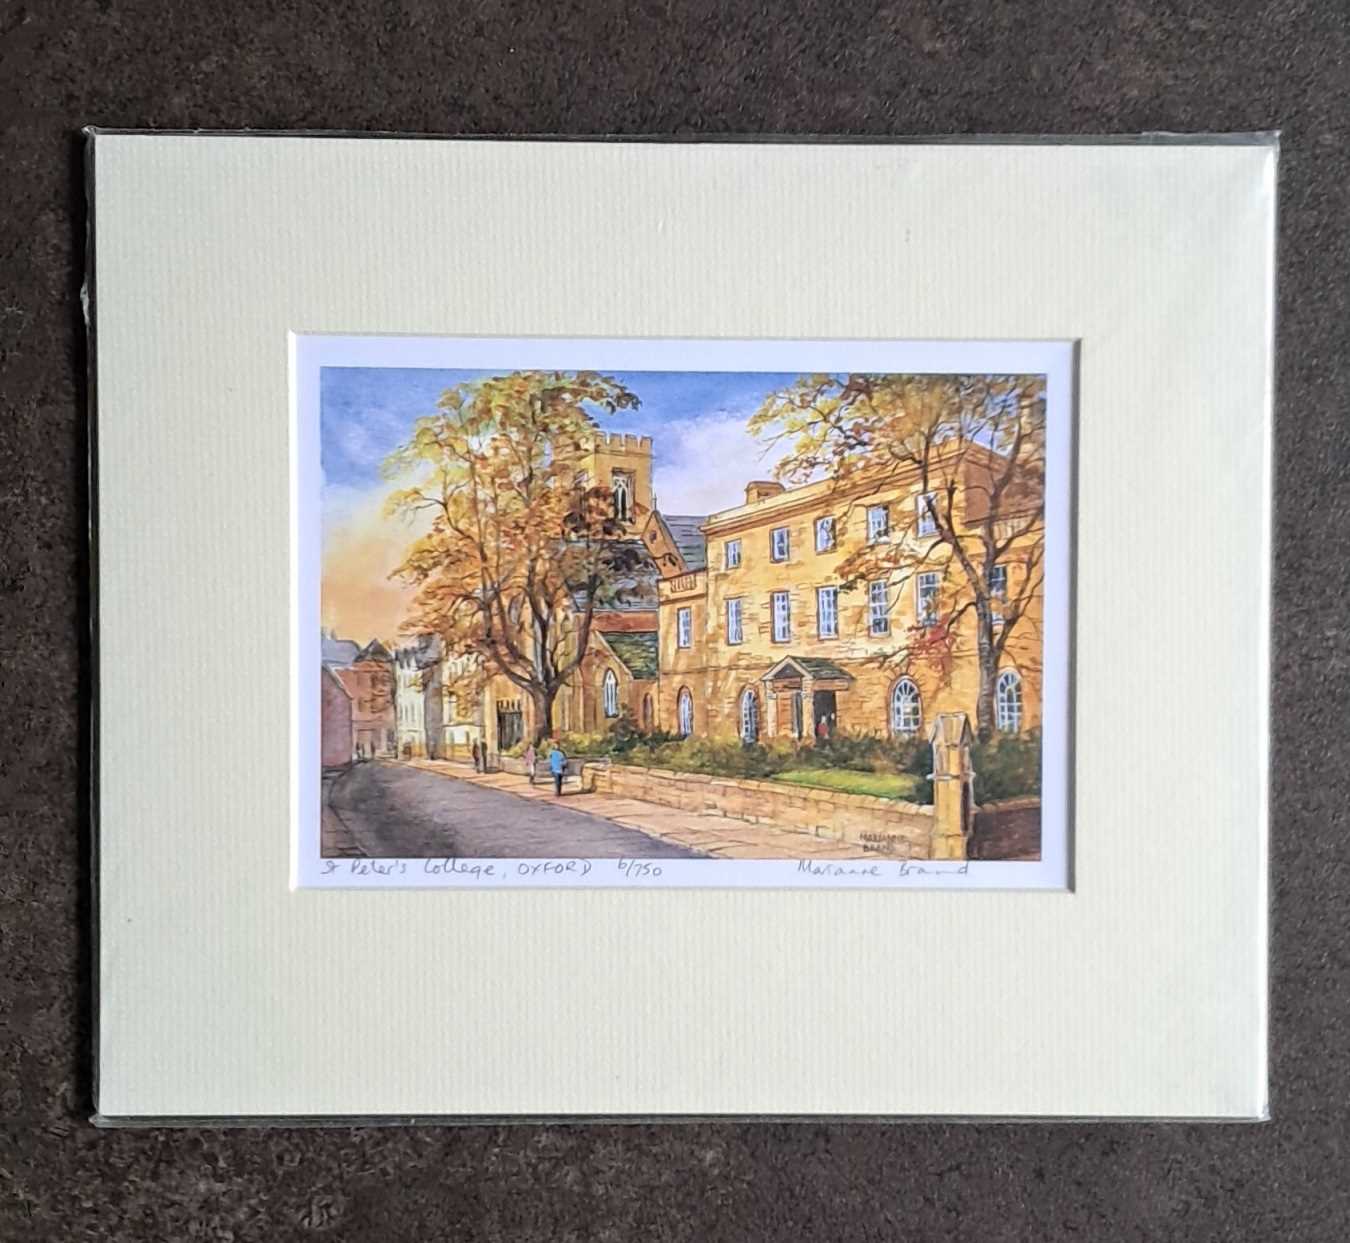 MARIANNE BRAND - ST PETERS COLLEGE OXFORD, LIMITED EDITION 6/750. 255 x 305 mm.